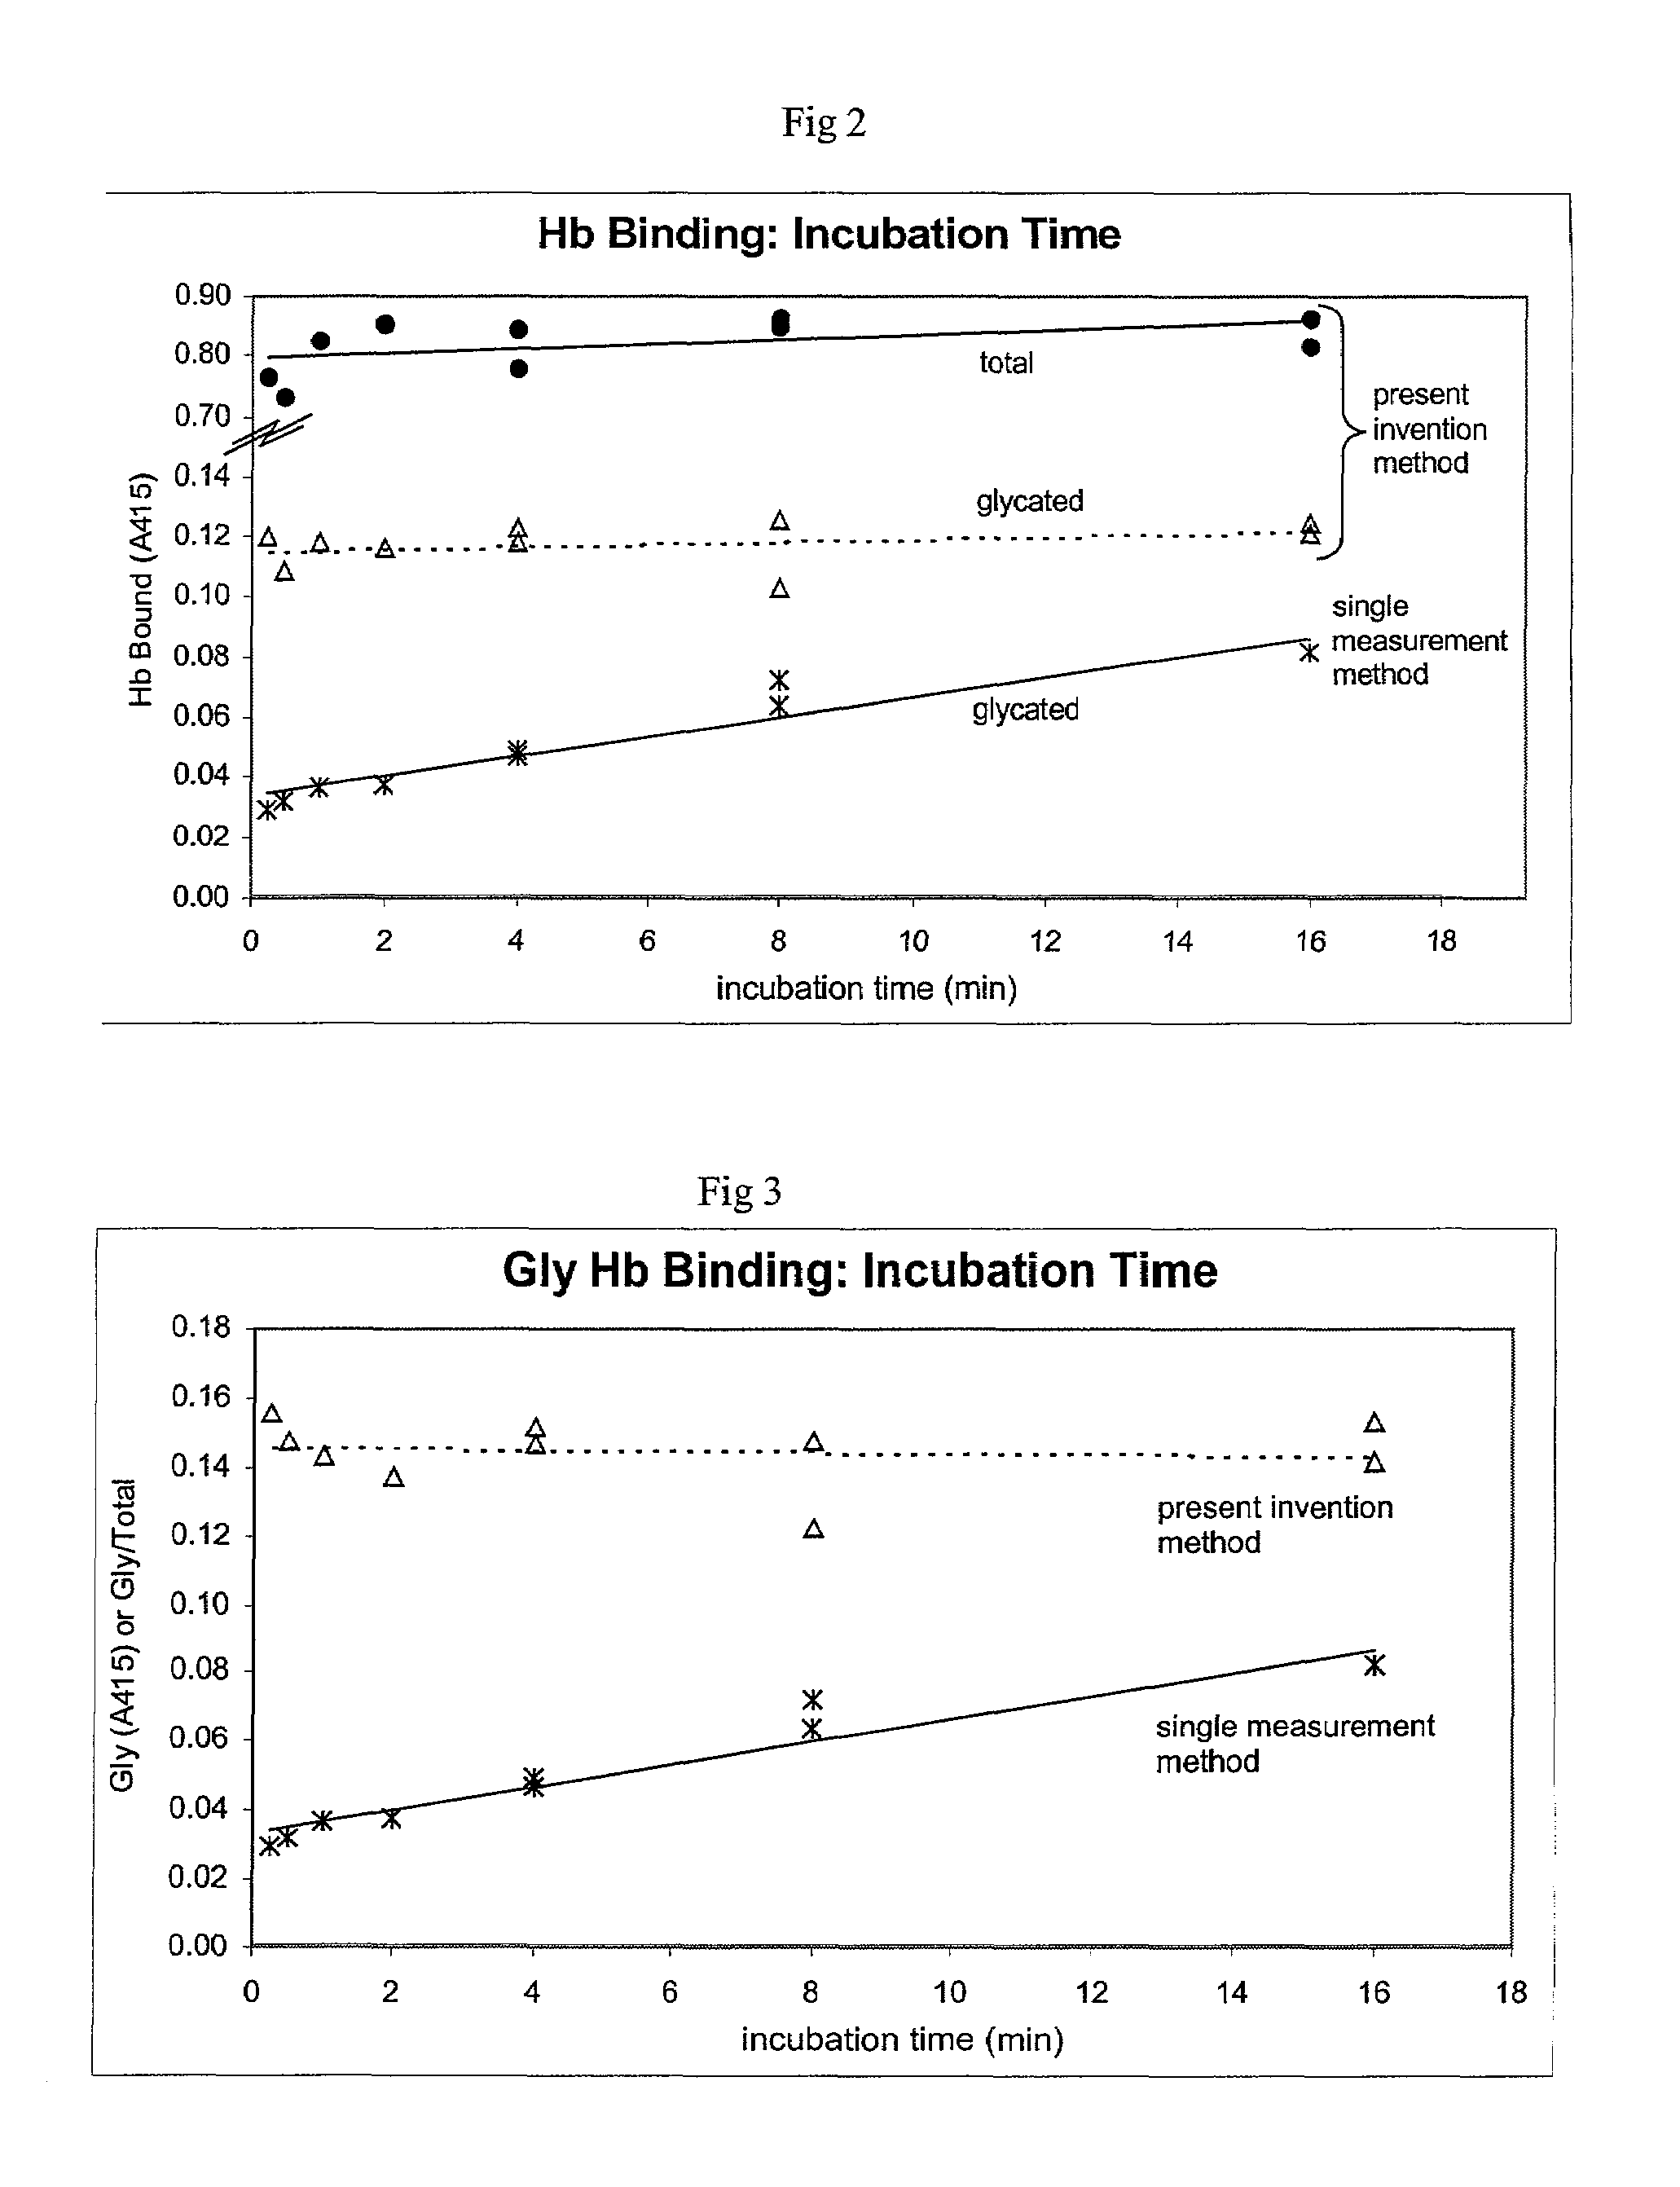 Ratiometric determination of glycated protein